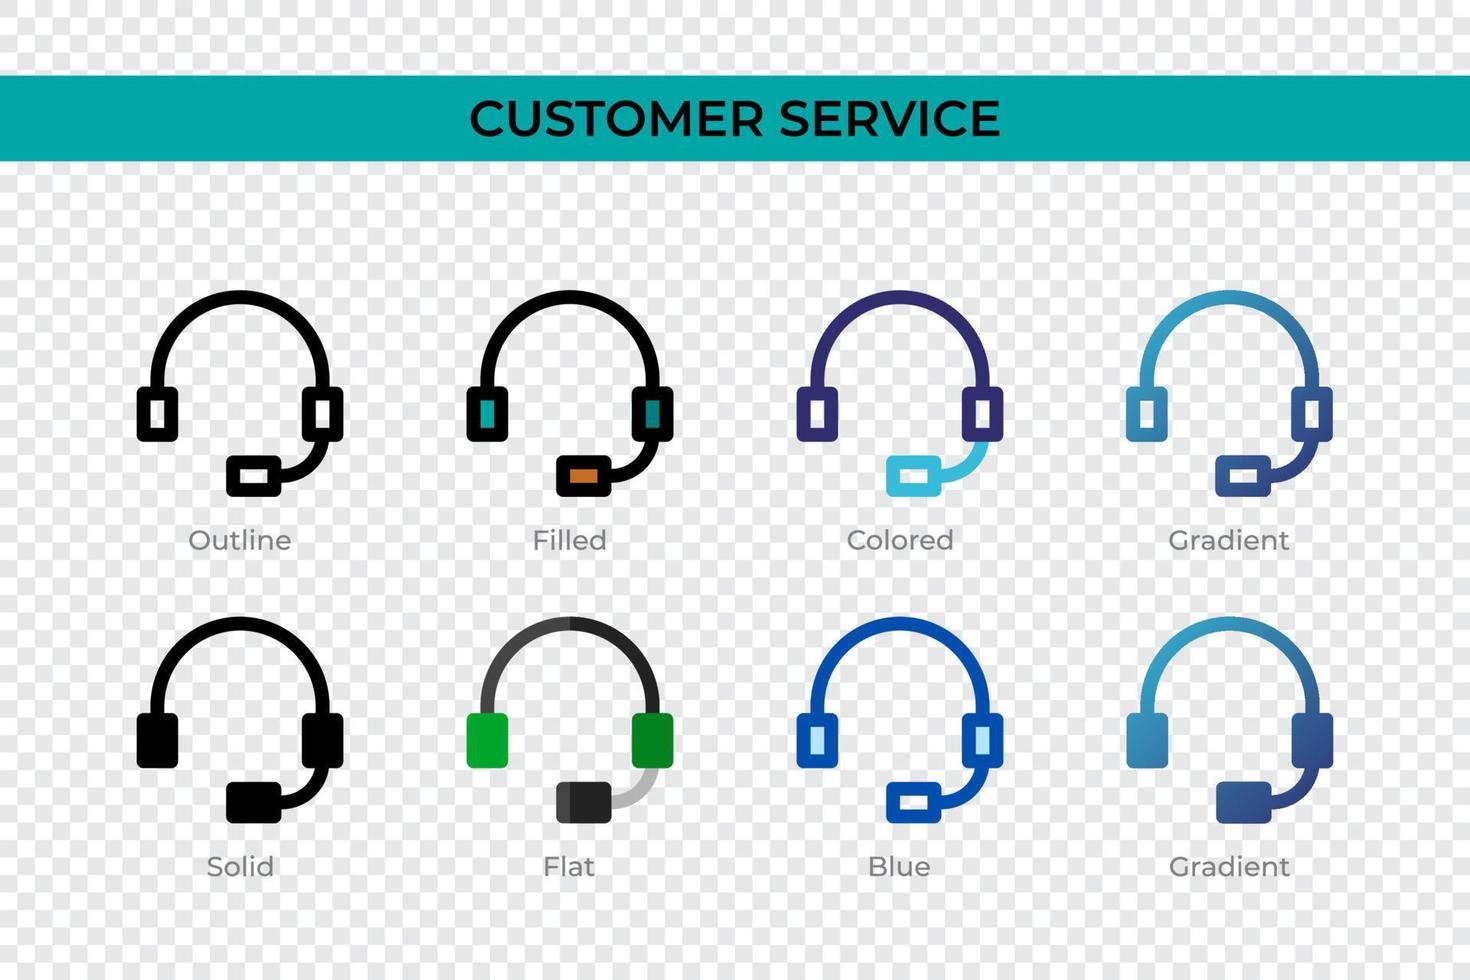 Customer Service icon in different style. Customer Service vector icons designed in outline, solid, colored, filled, gradient, and flat style. Symbol, logo illustration. Vector illustration